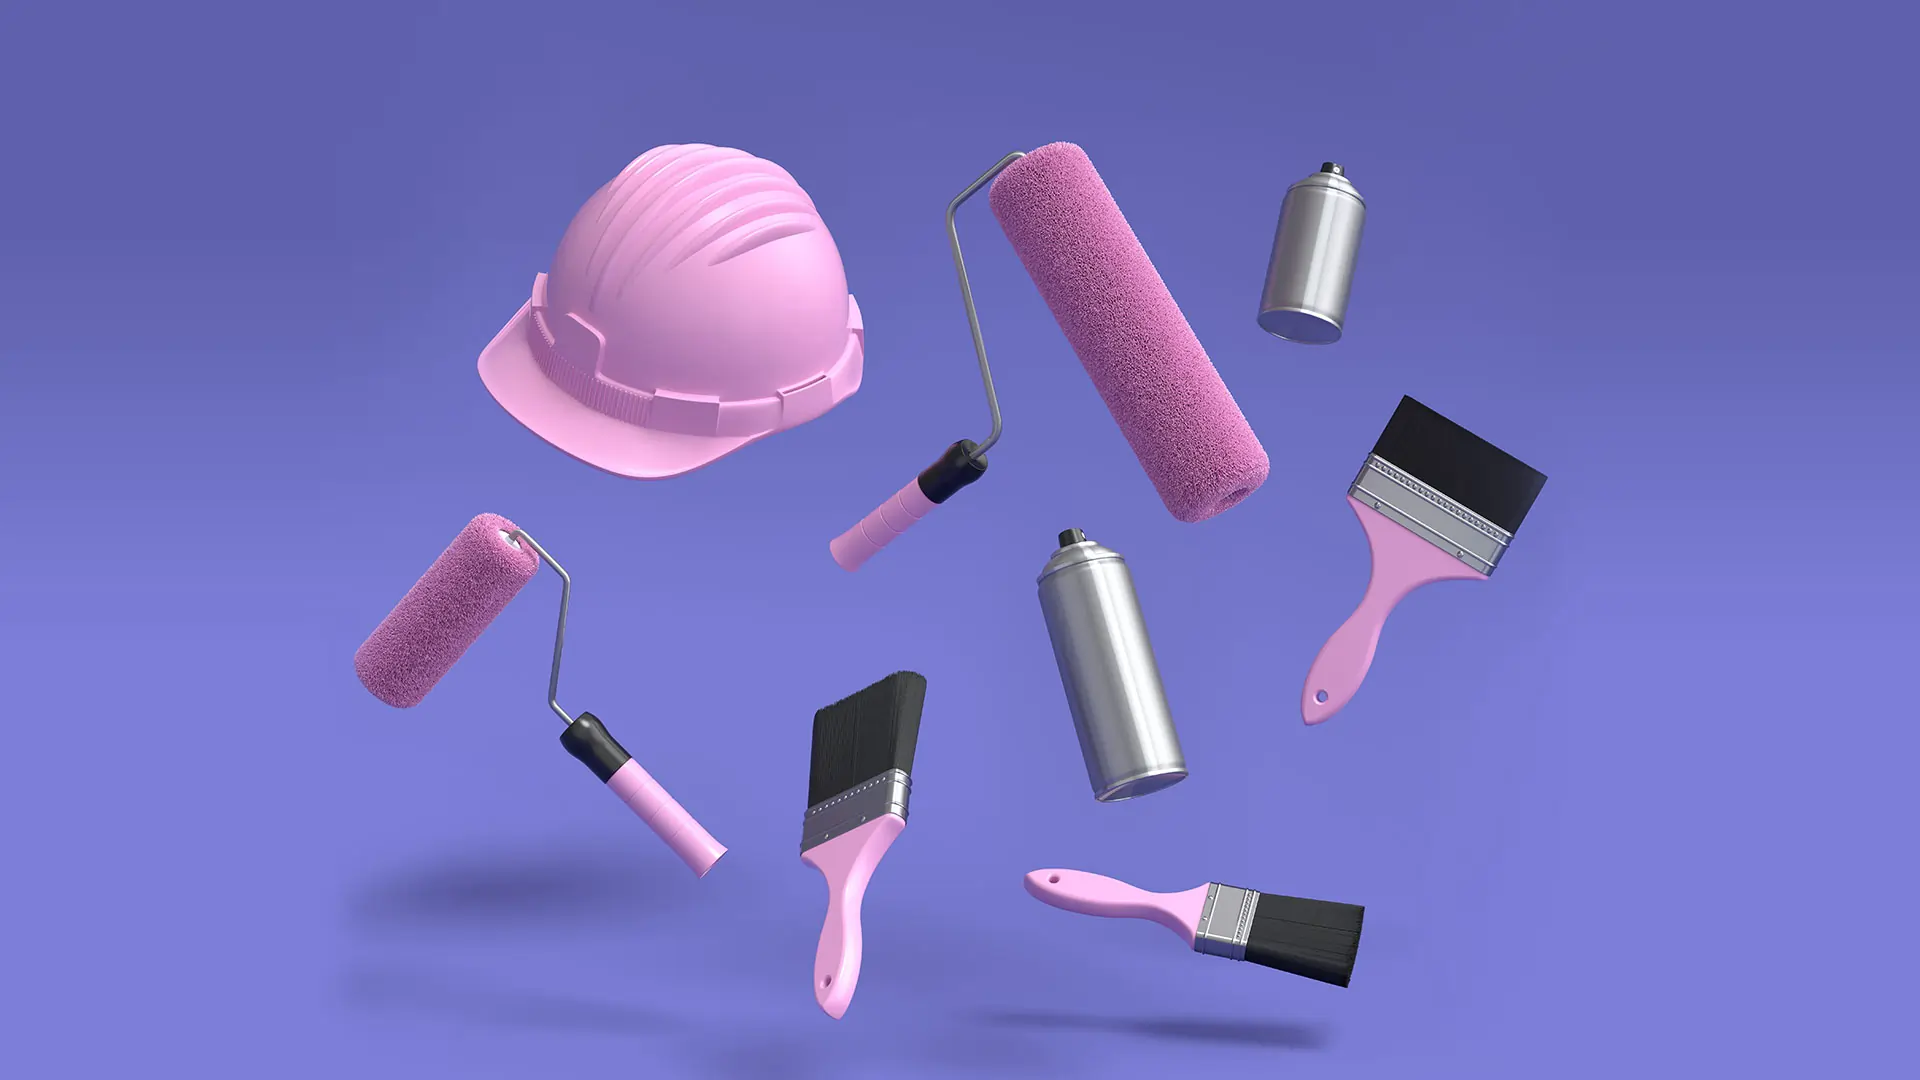 painting tools and hard hat floating on purple background